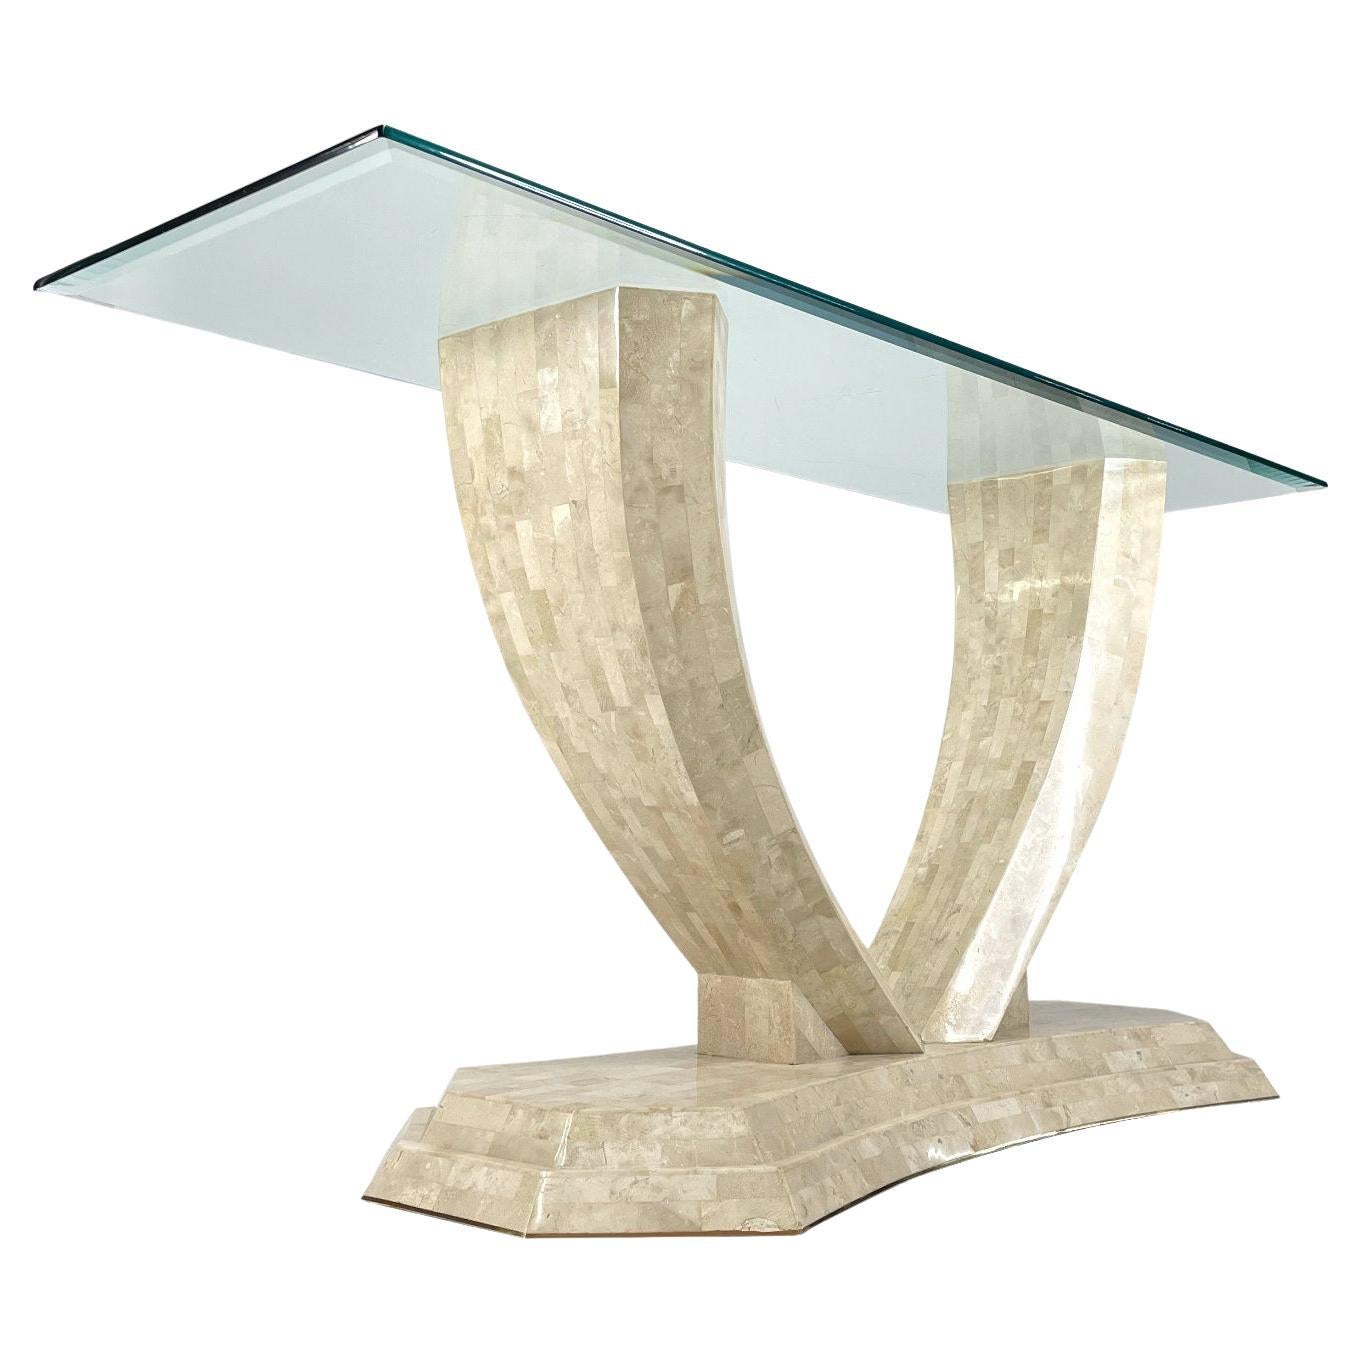 Robert Marcius for Maitland Smith arched tessellated stone console table. The elegantly bowed sofa table is perfect for an entryway or behind a sofa as the name implies. This piece is particularly exquisite, crafted from meticulously laid blocks of